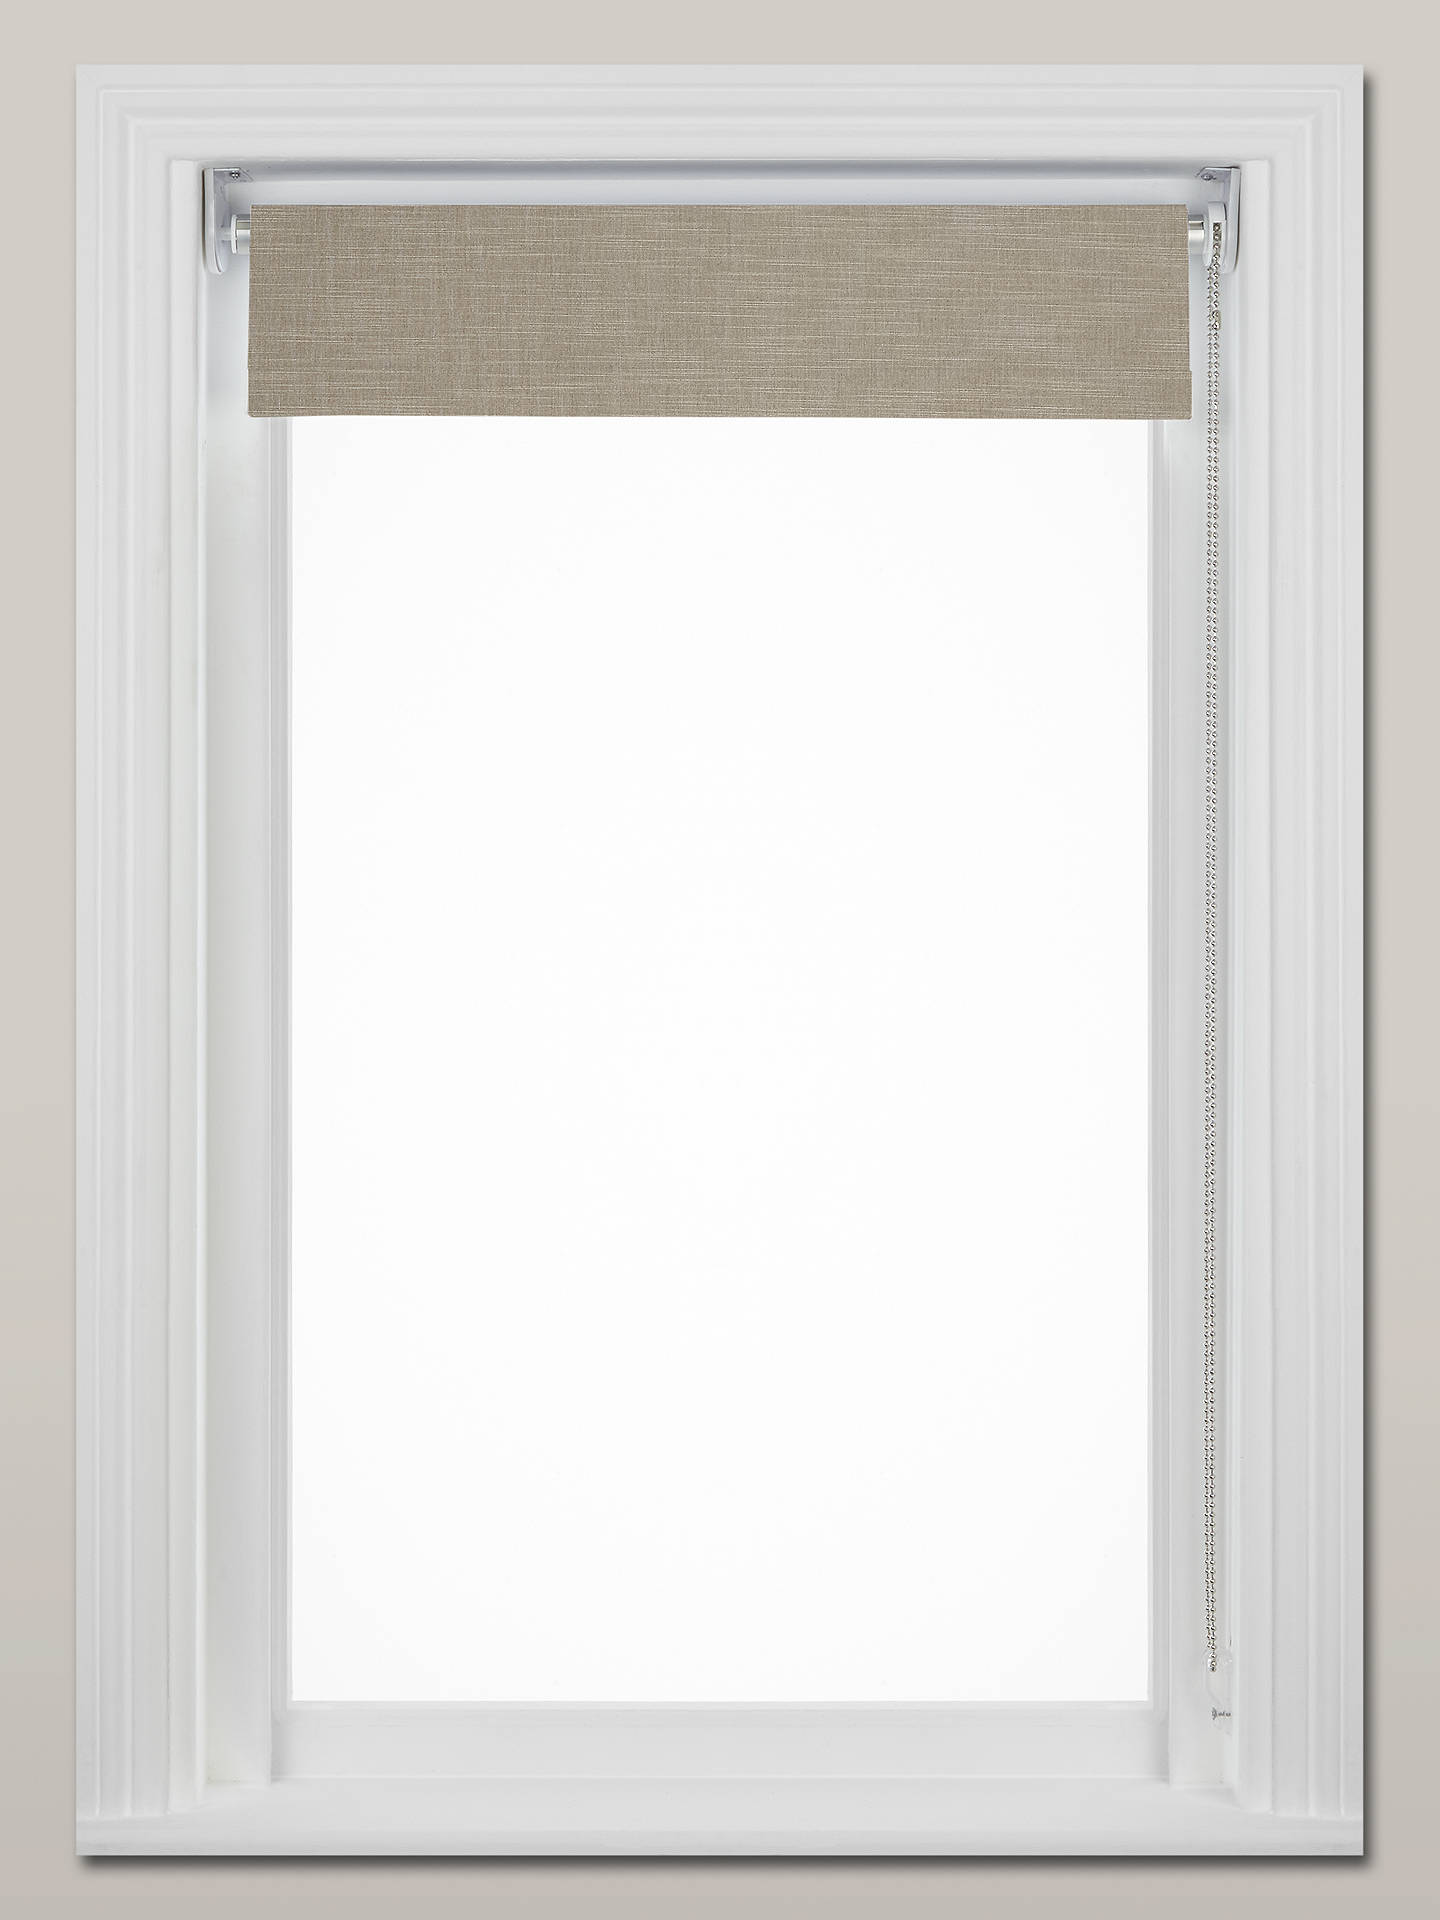 John Lewis Lima Made to Measure Daylight Roller Blind, Stone